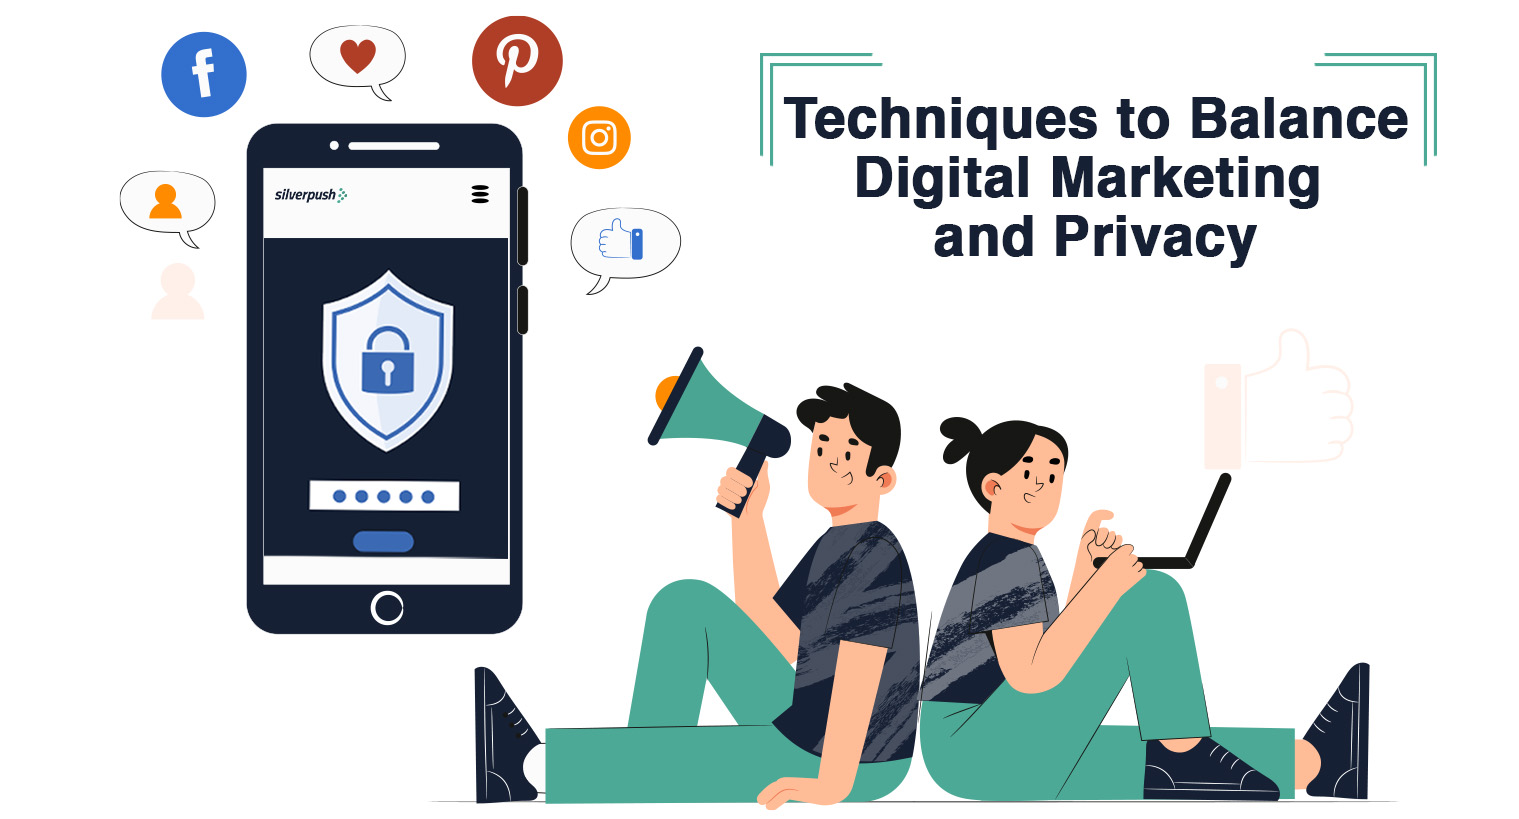 Digital Marketing and Privacy